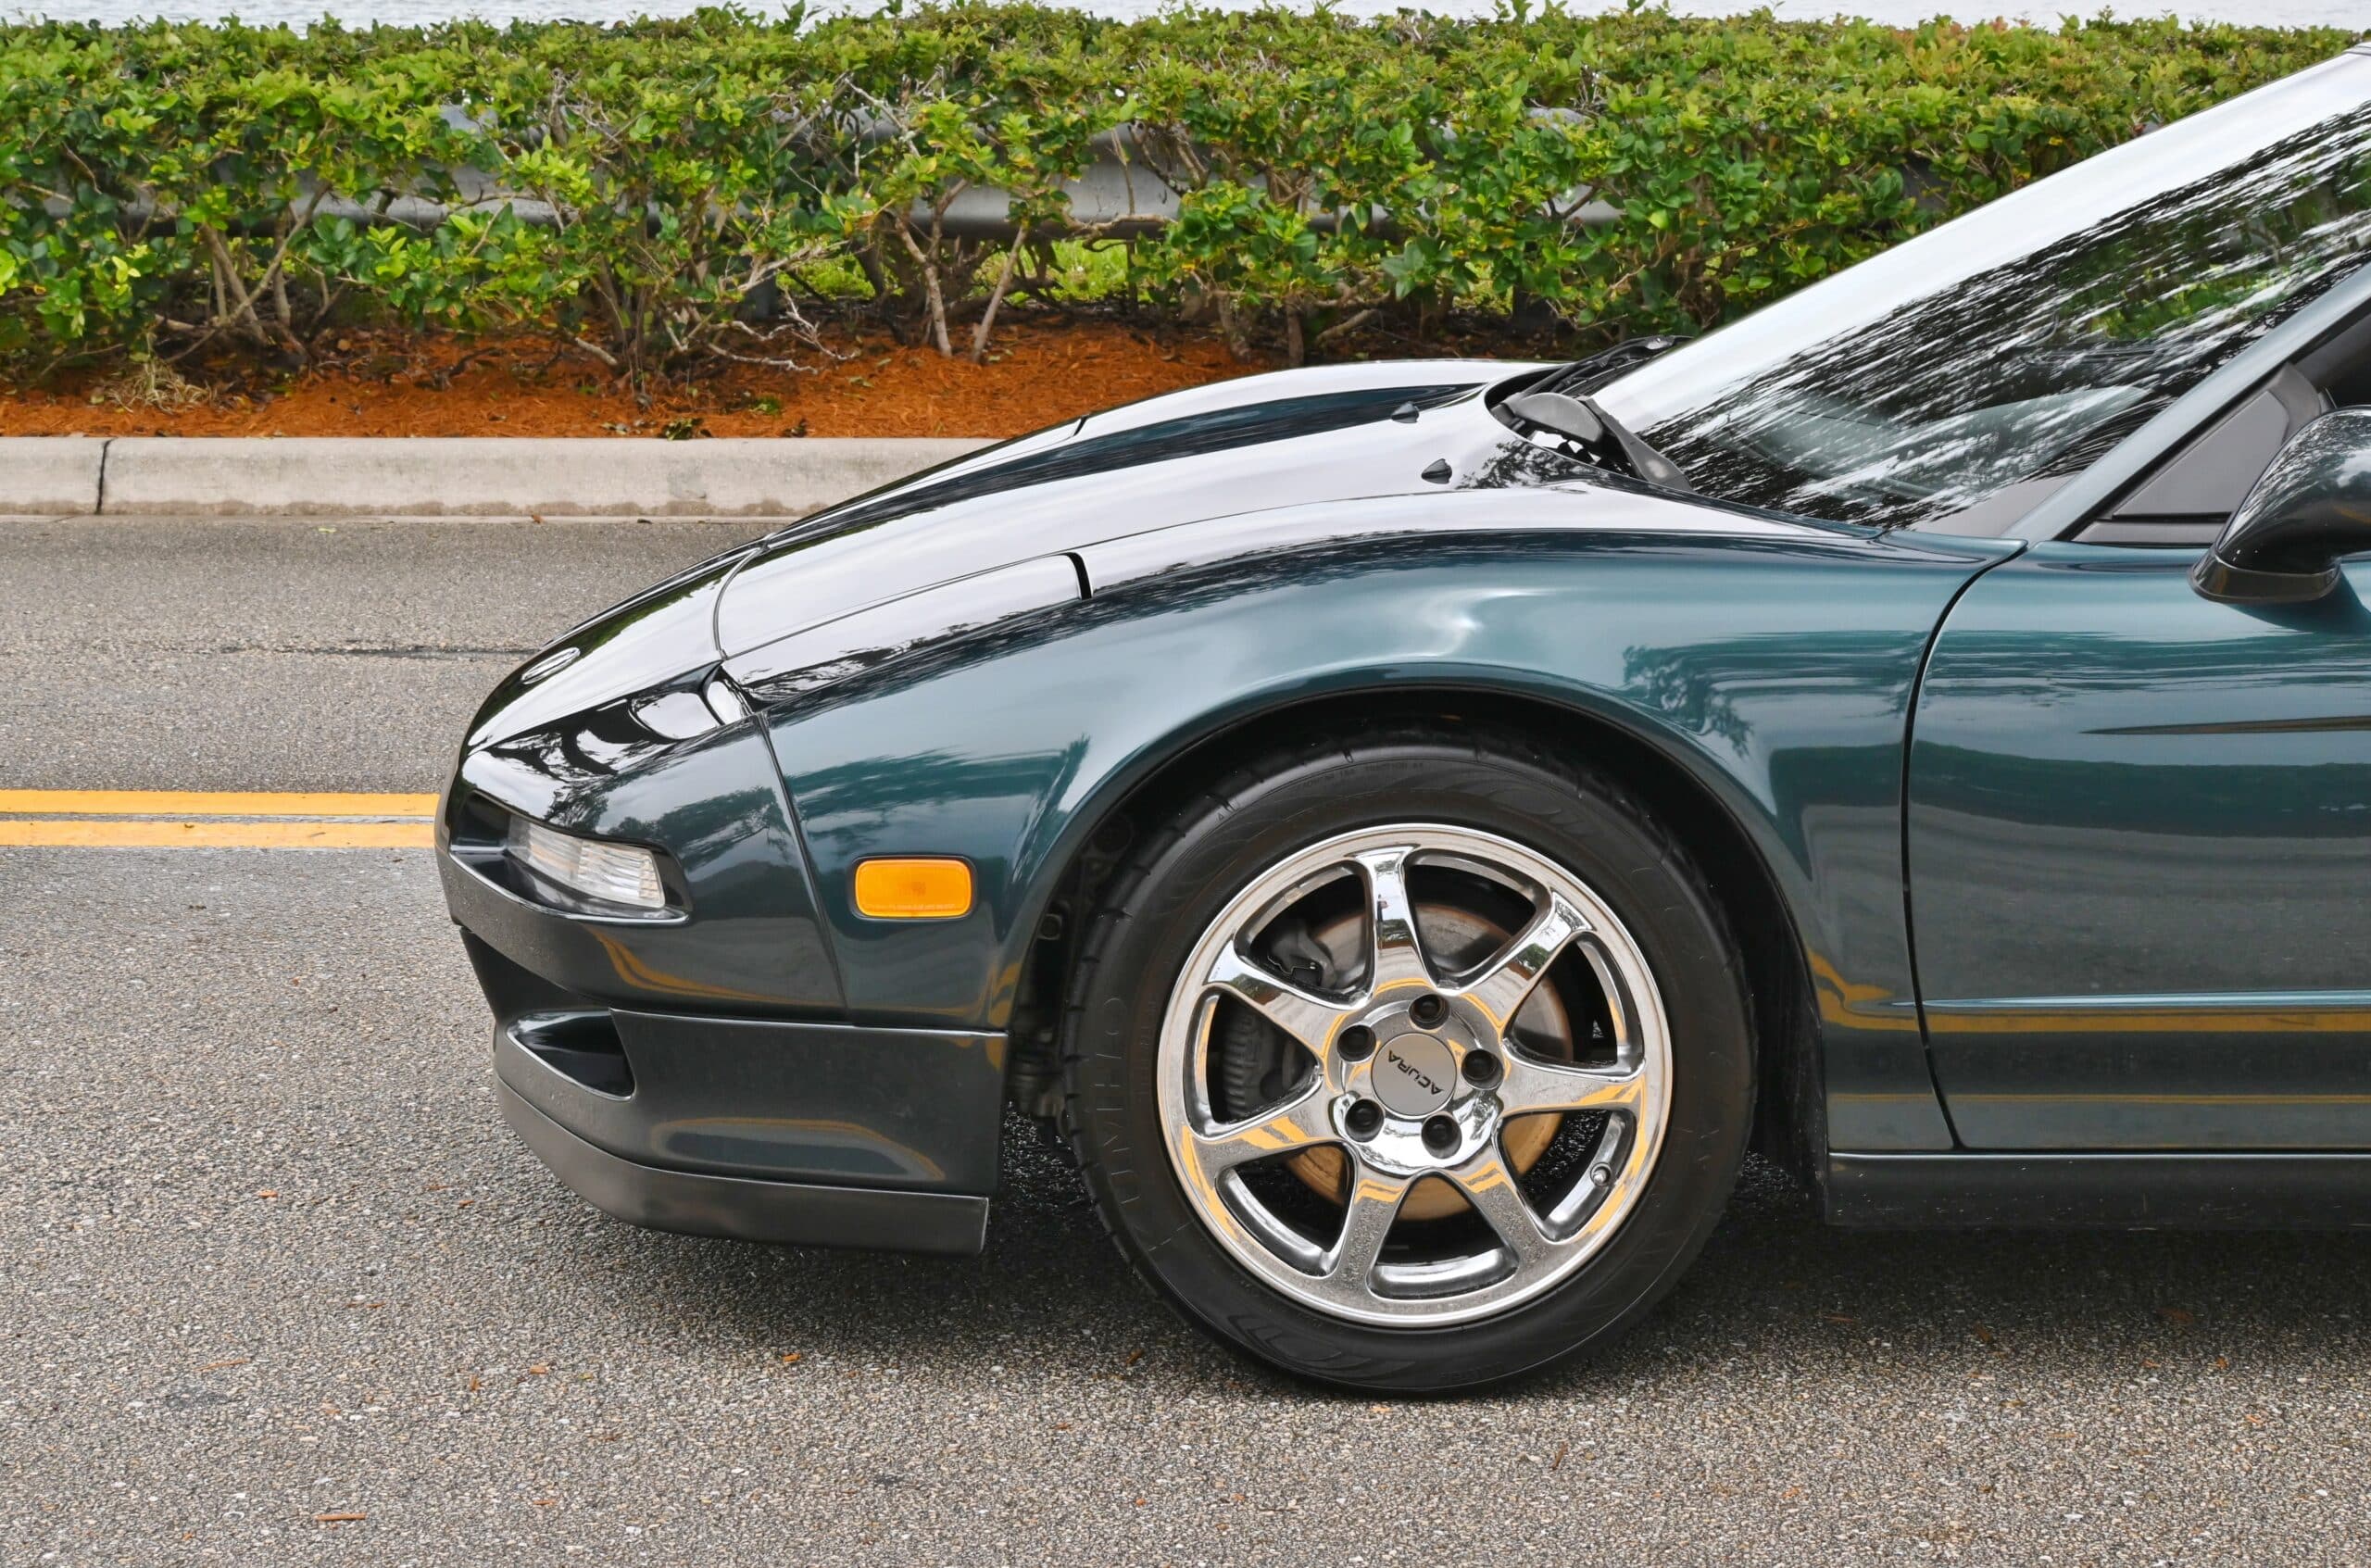 1995 Acura NSX T 1 of 67 In This Color Combo-Only 56K Miles -5 Speed Manual-100% Stock -Like New